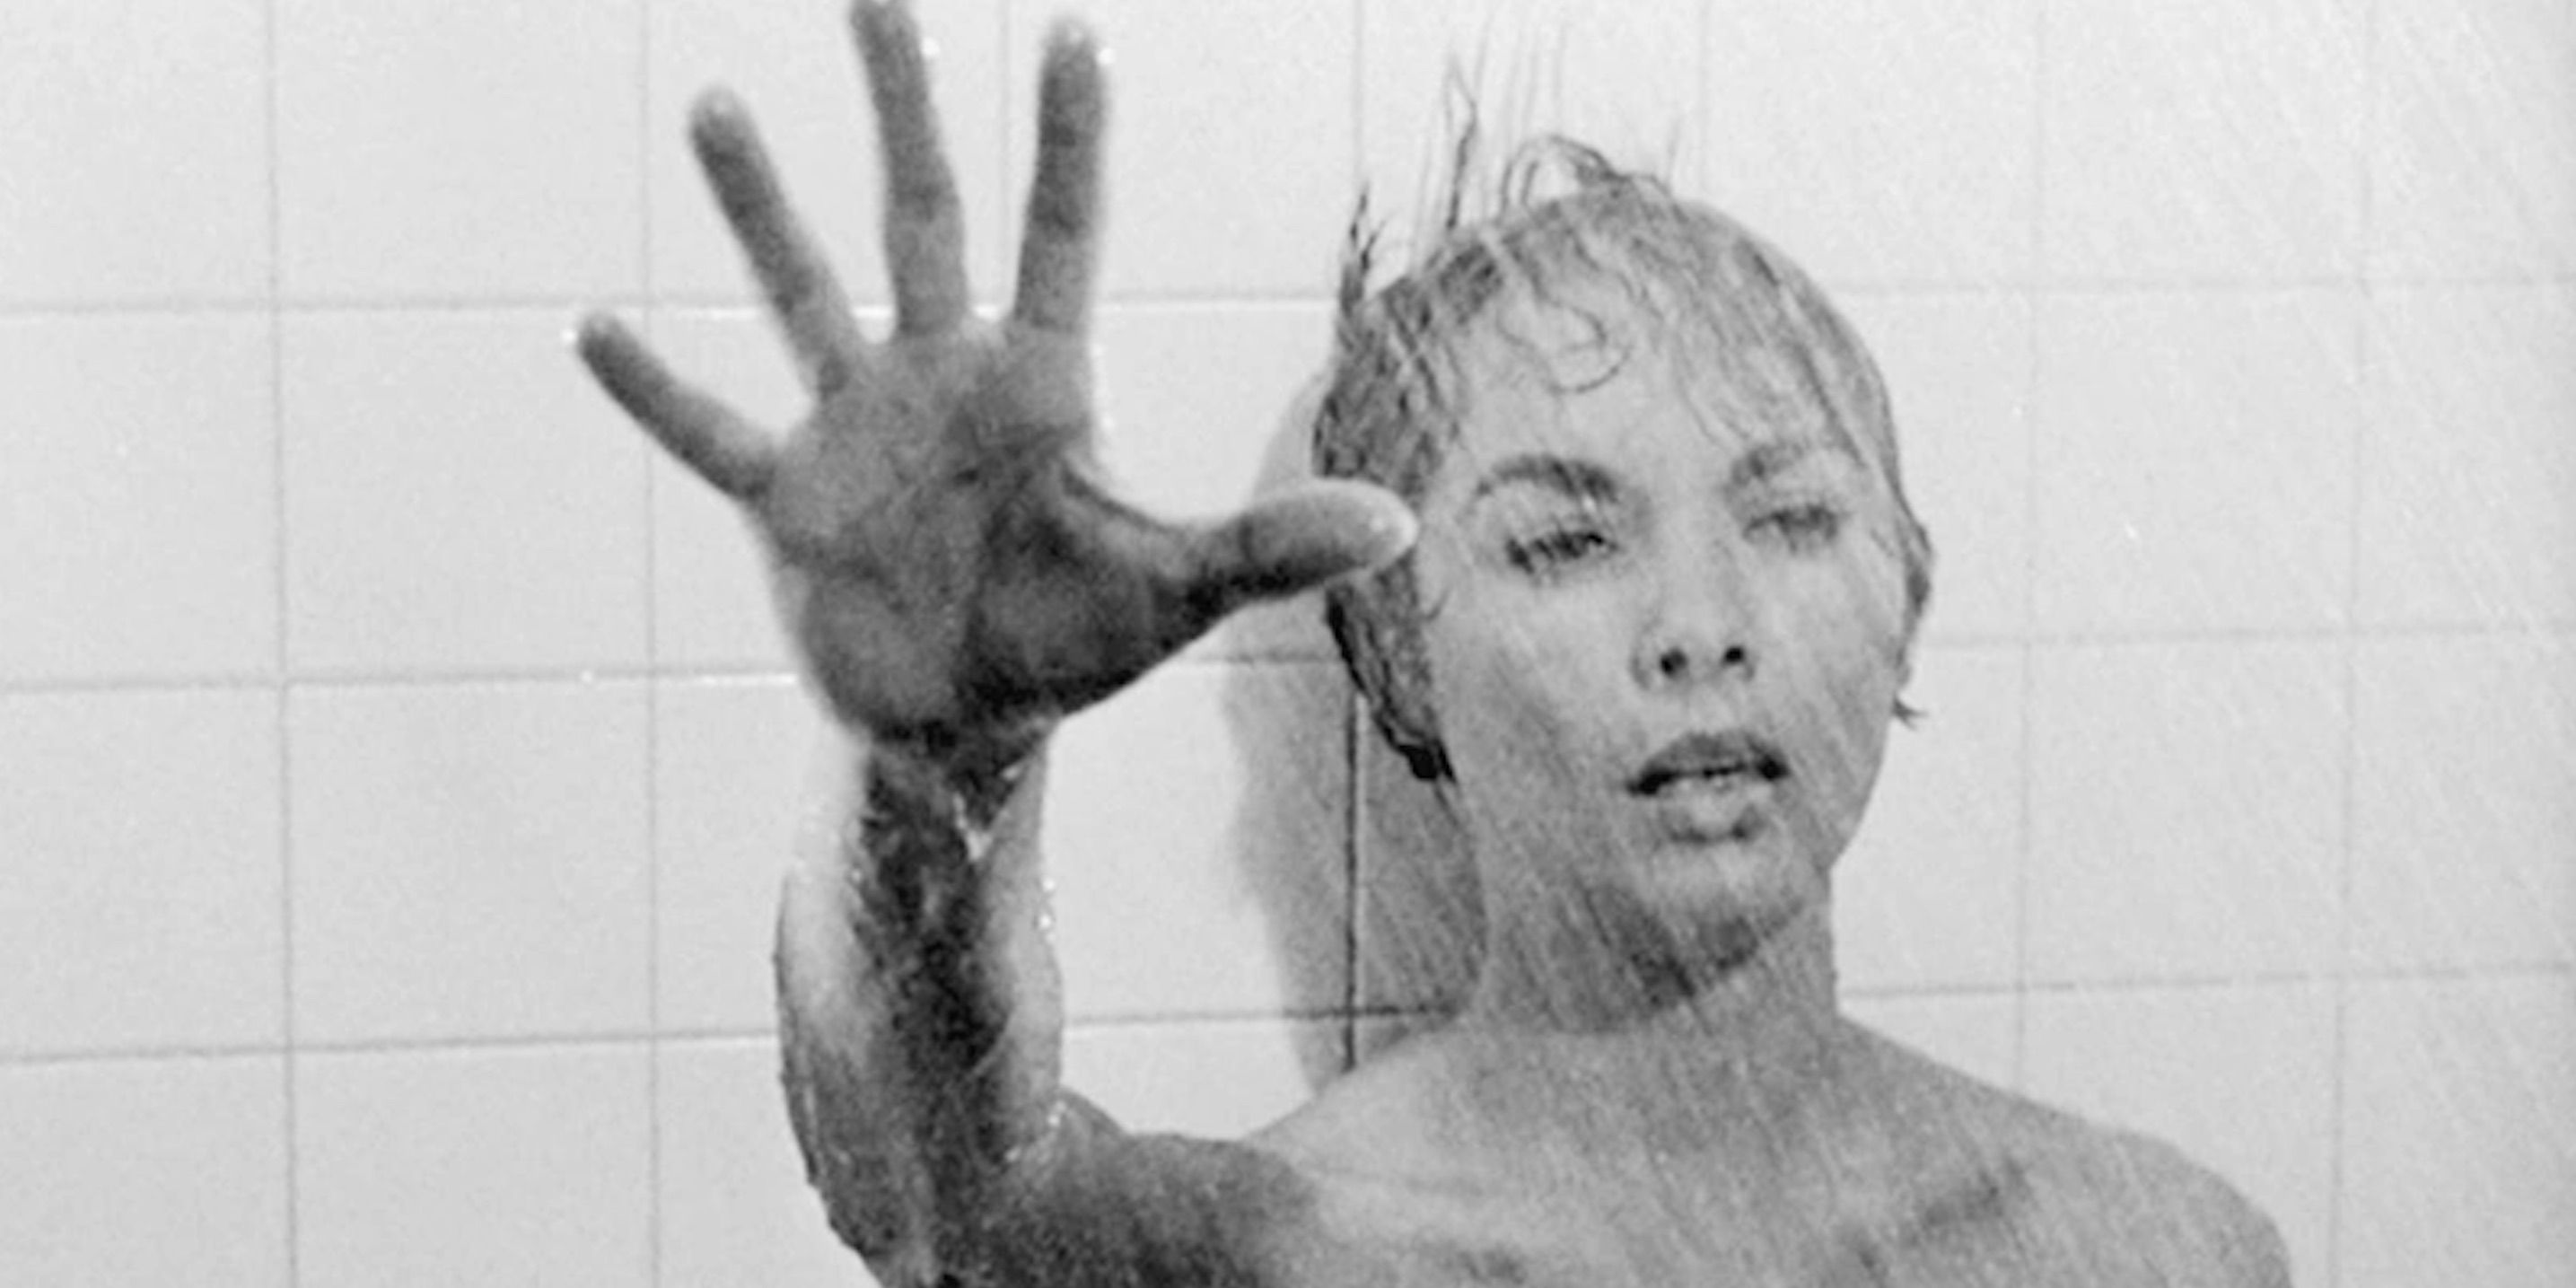 Janet Leigh as Marion Crane reaching out while collapsin in the shower in Psycho